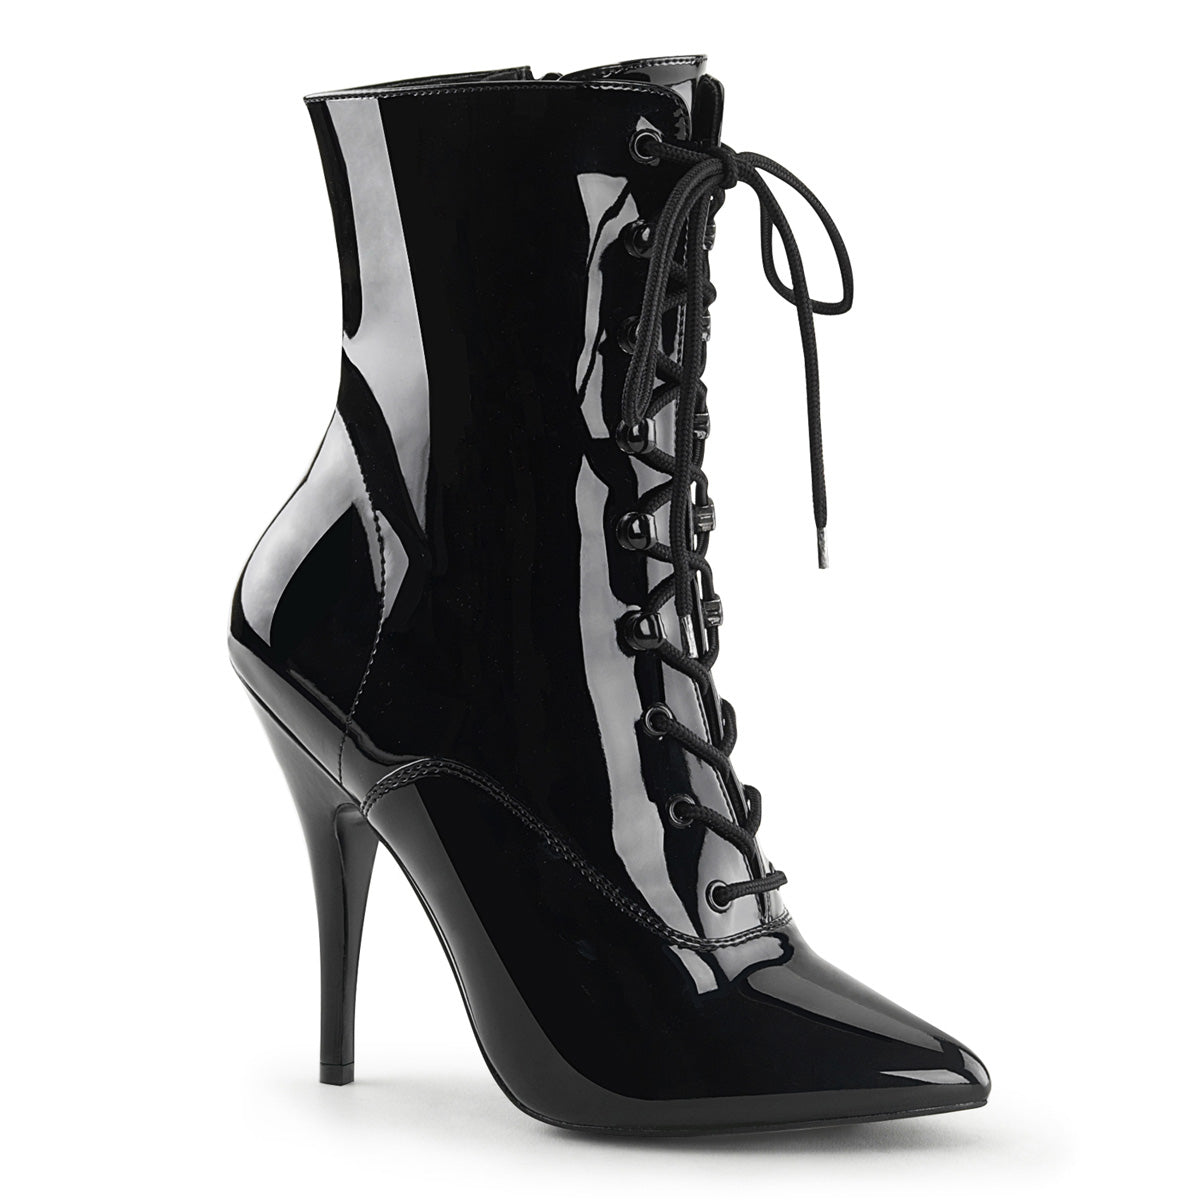 SEDUCE-1020 Pointed Toe Lace Up Boots